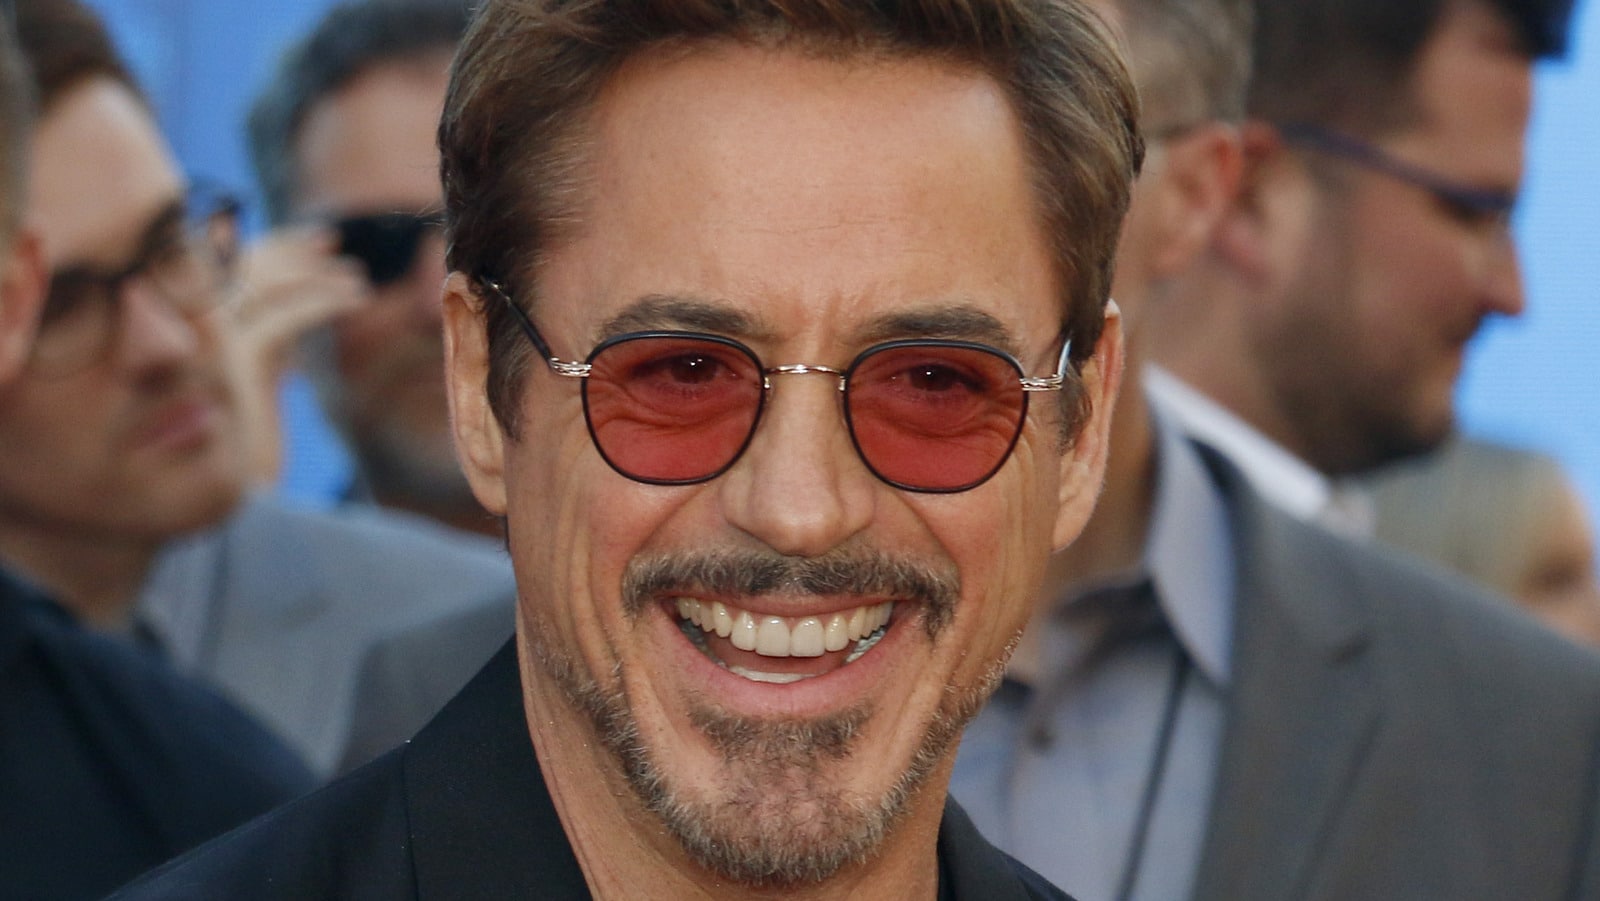 unknown facts about robert downey jr